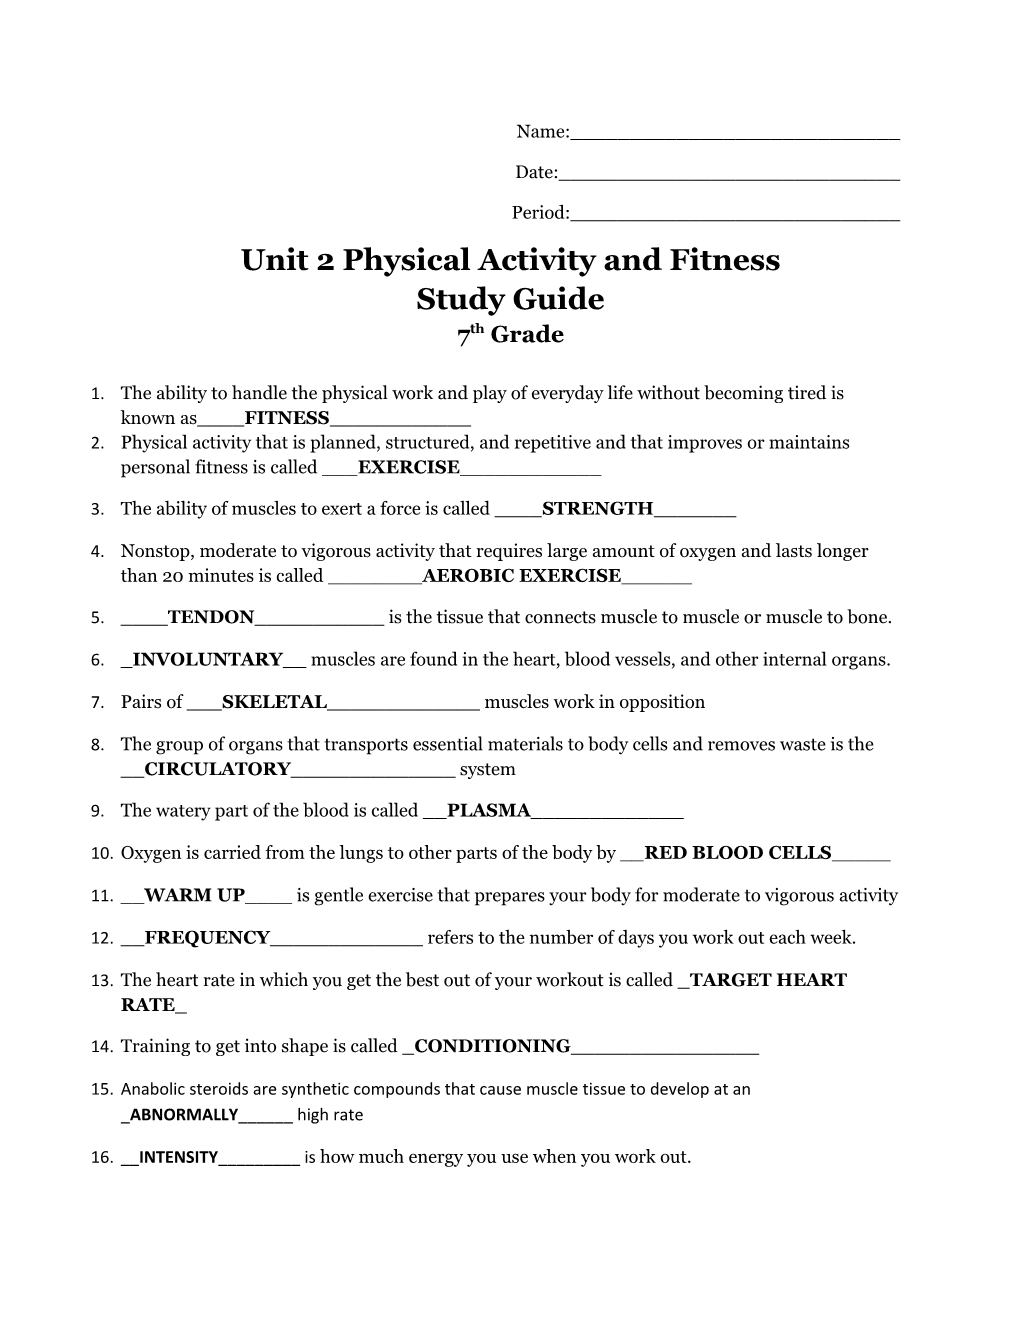 Unit 2 Physical Activity and Fitness